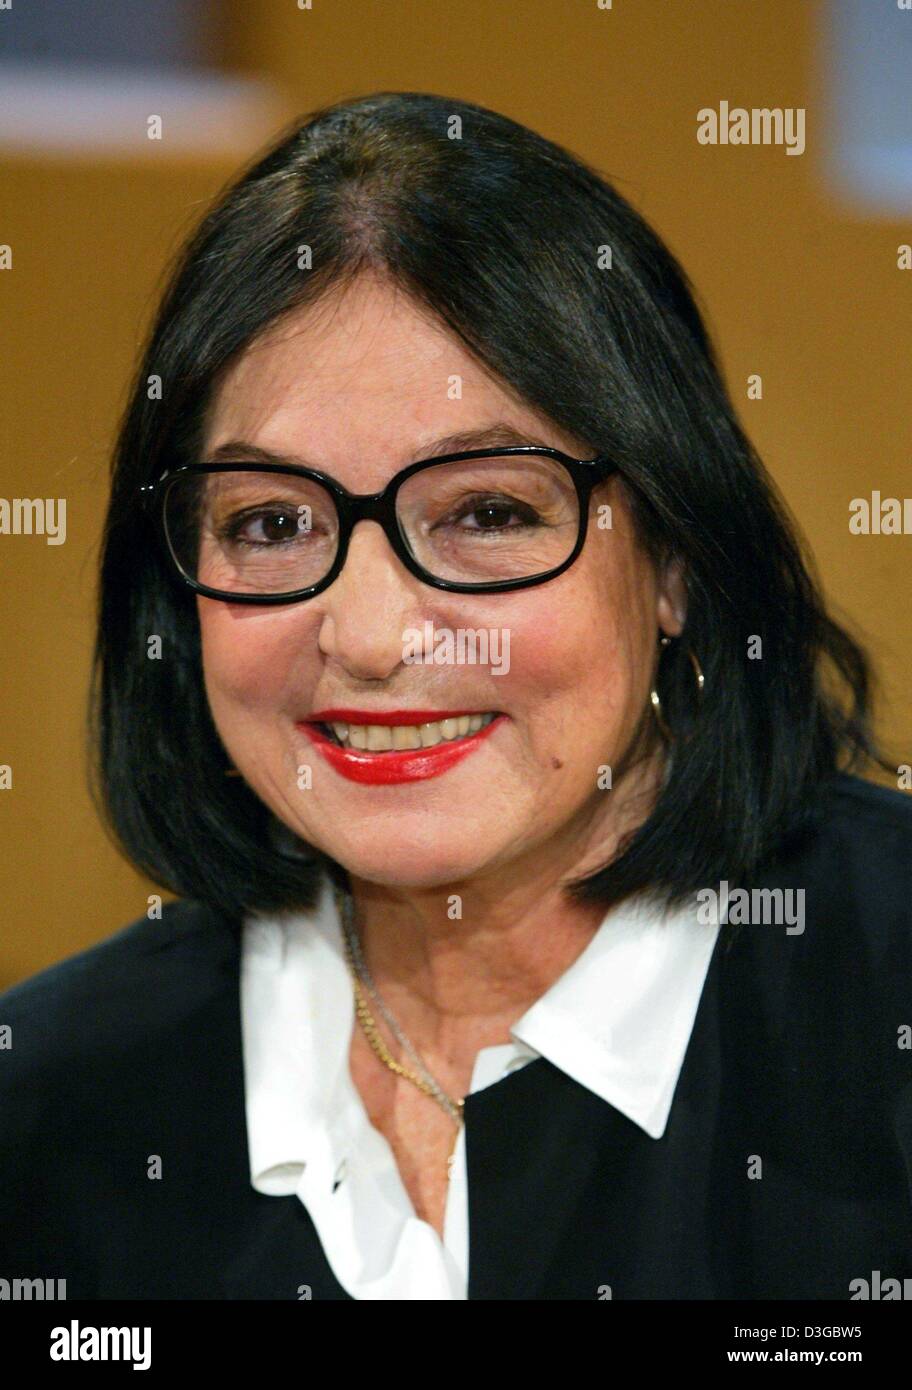 (dpa) - Greek singer Nana Mouskouri smiles during an appearance in a TV show in Cologne, Germany, 28 October 2004. Stock Photo